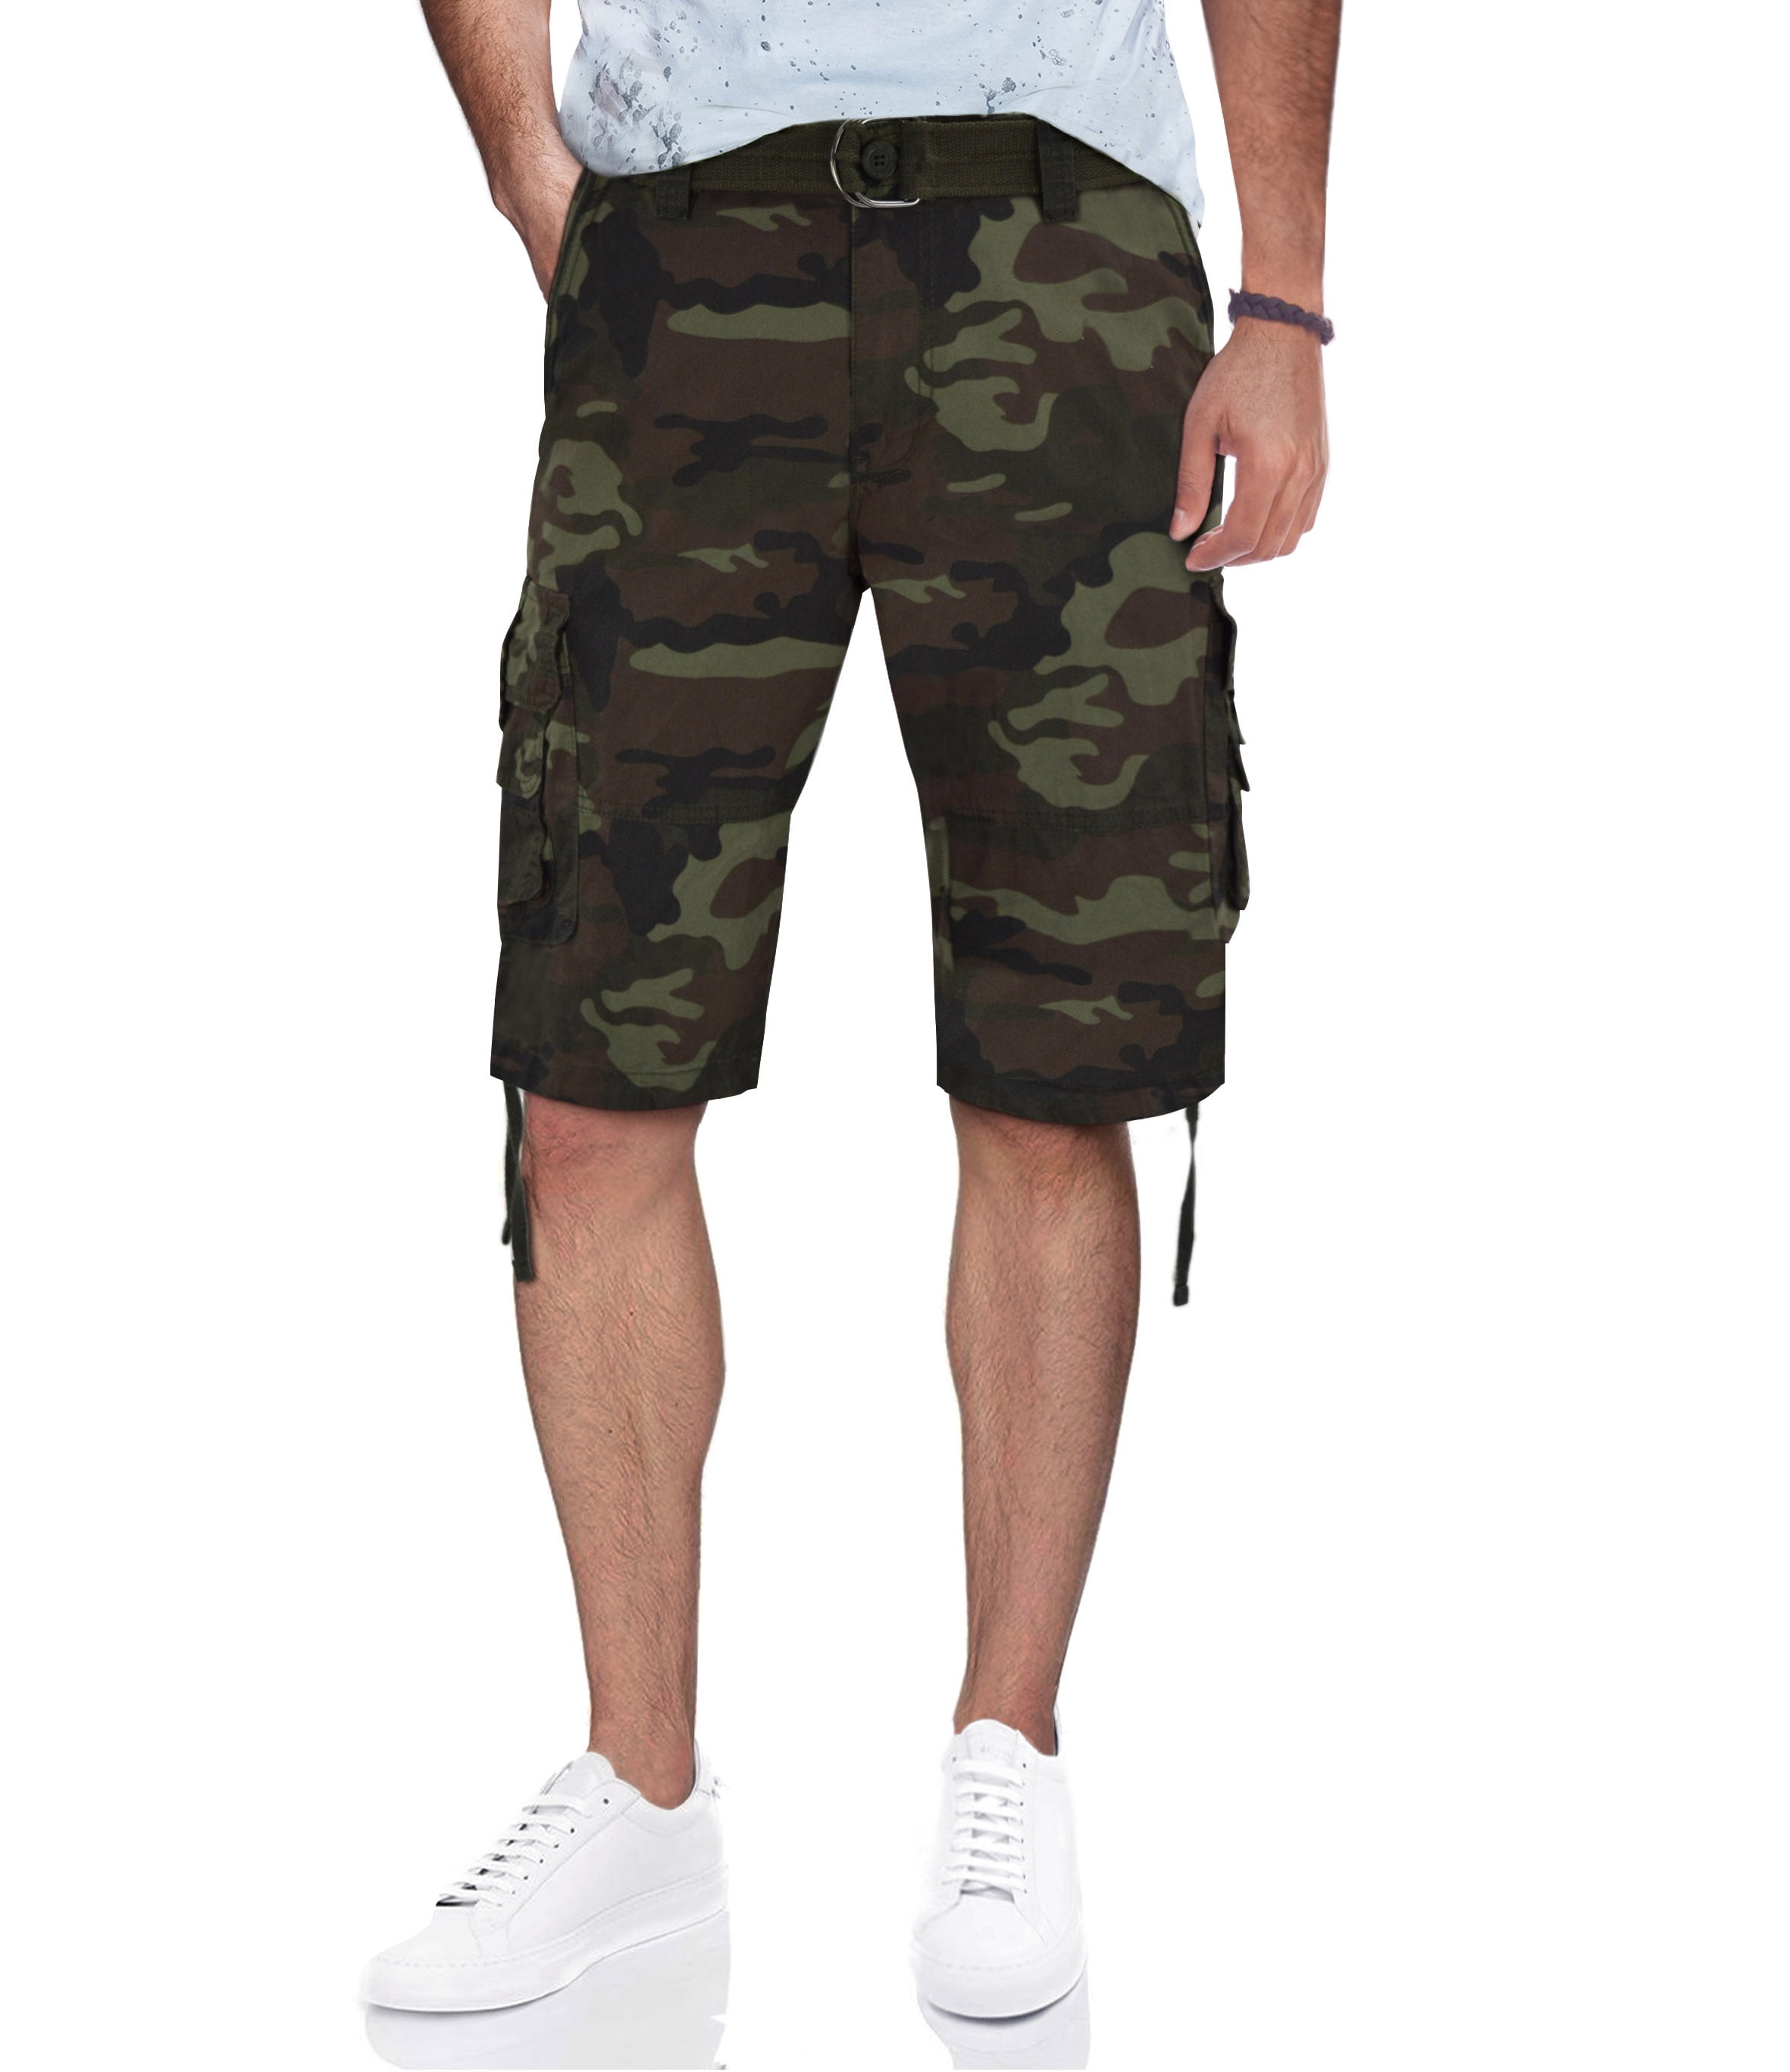 Easy Care Camo Pants Hiking & Travelling Blue 3-4 Years for Camping 100% Cotton Summer Shorts Mountain Warehouse Kids Camo Cargo Shorts Pockets Lightweight Short Trousers 